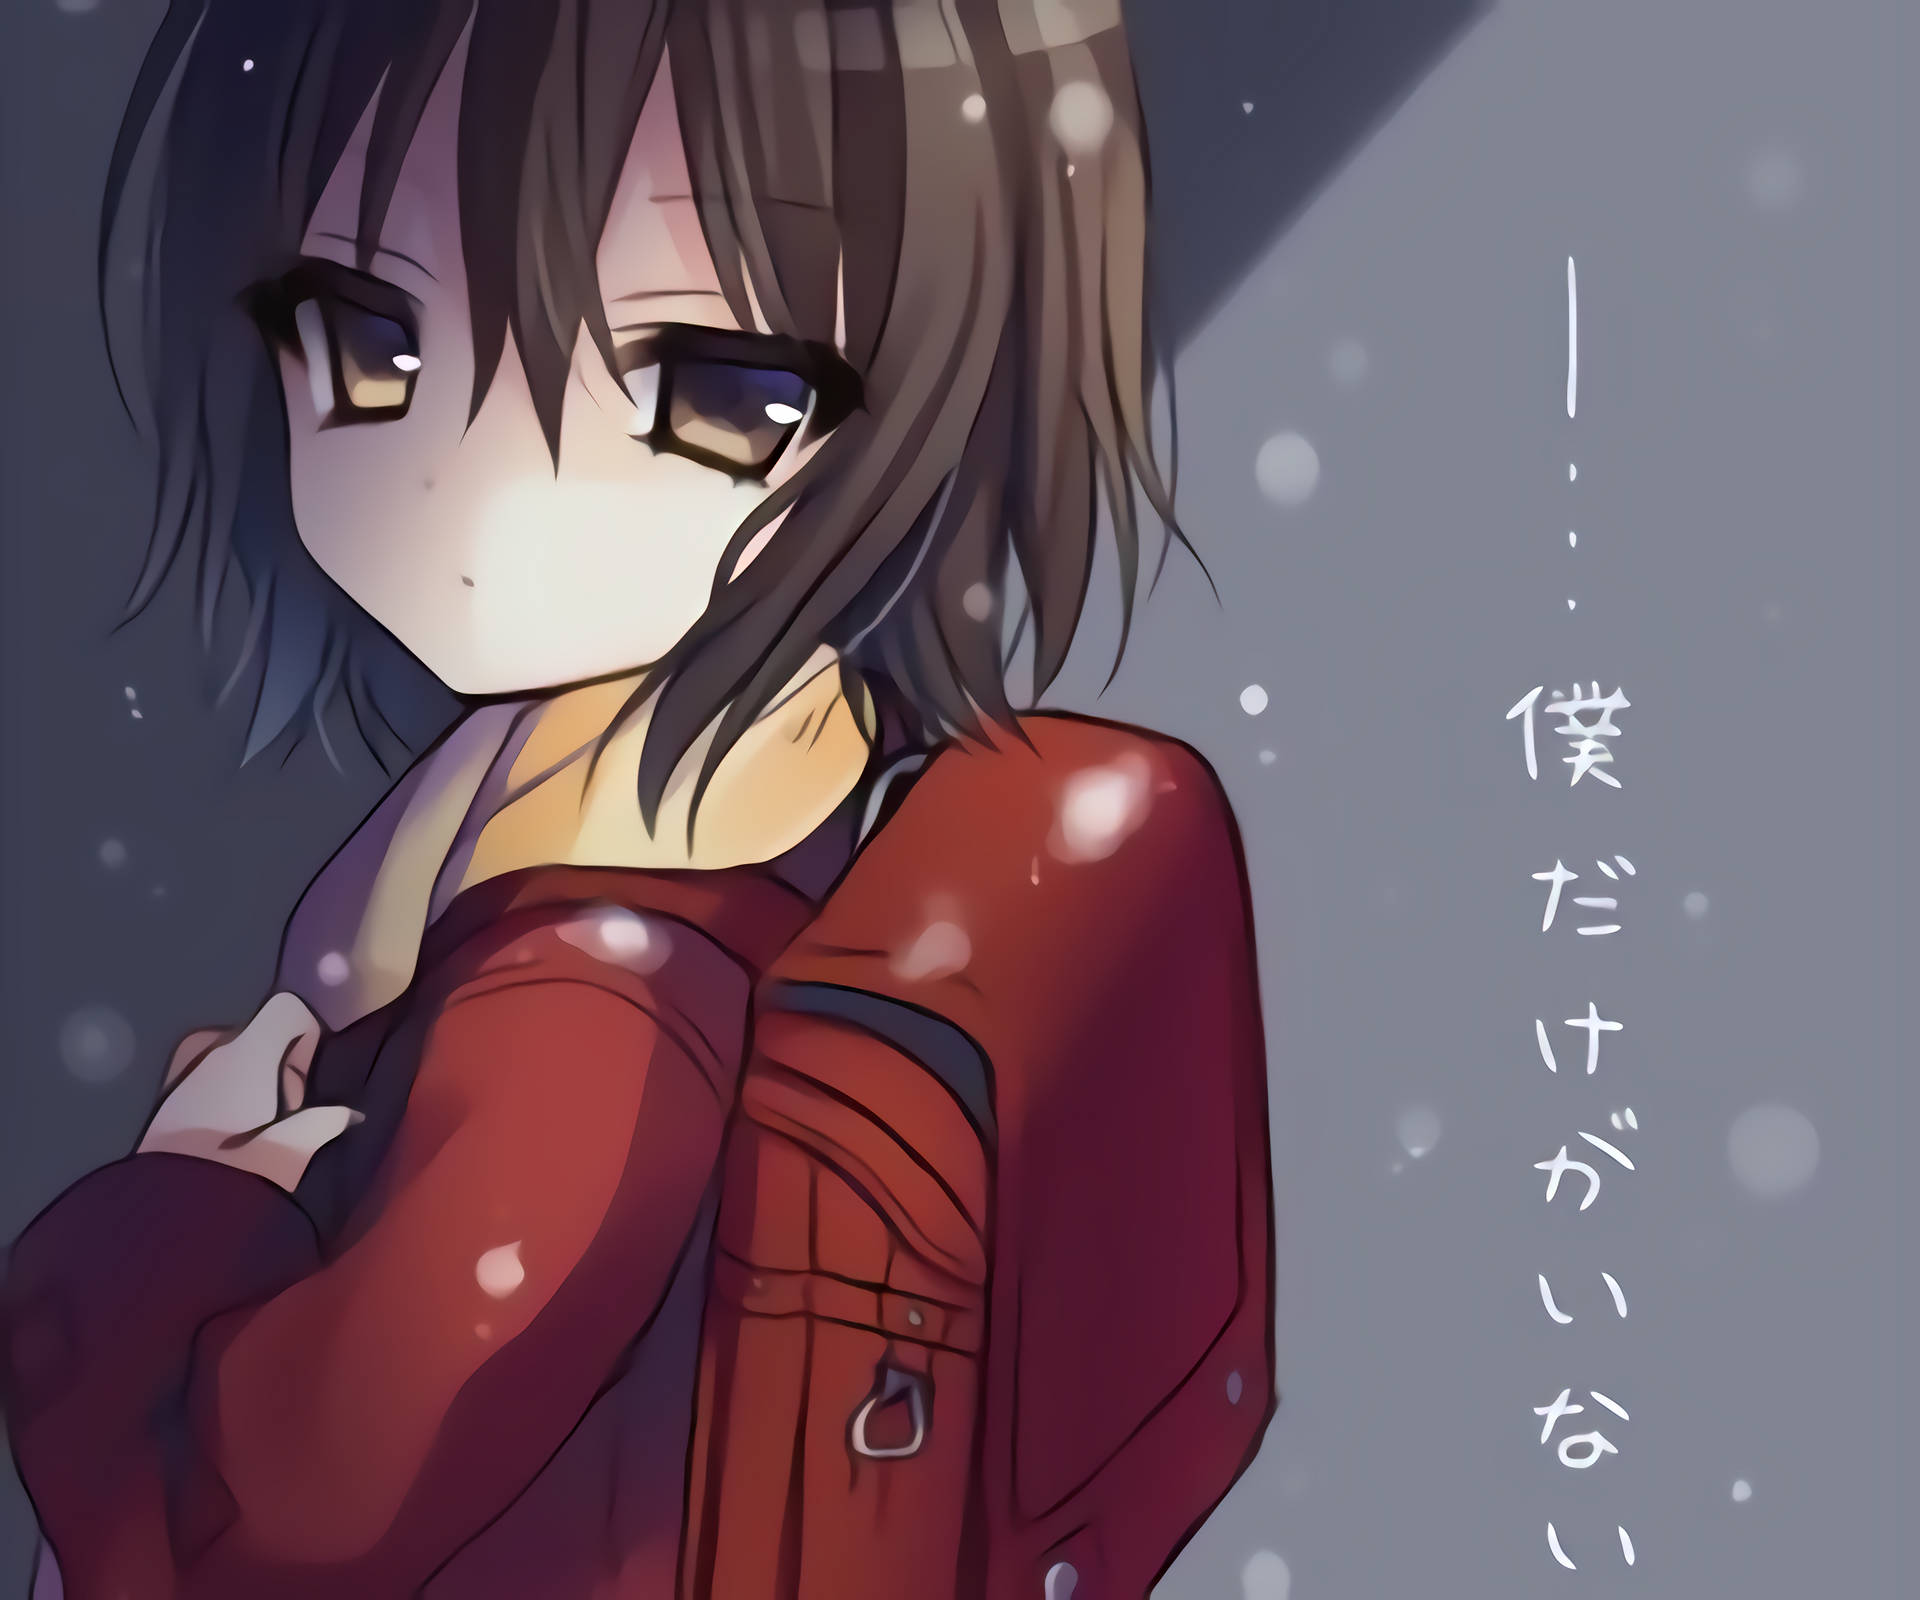 A Cute Girl In Erased Background